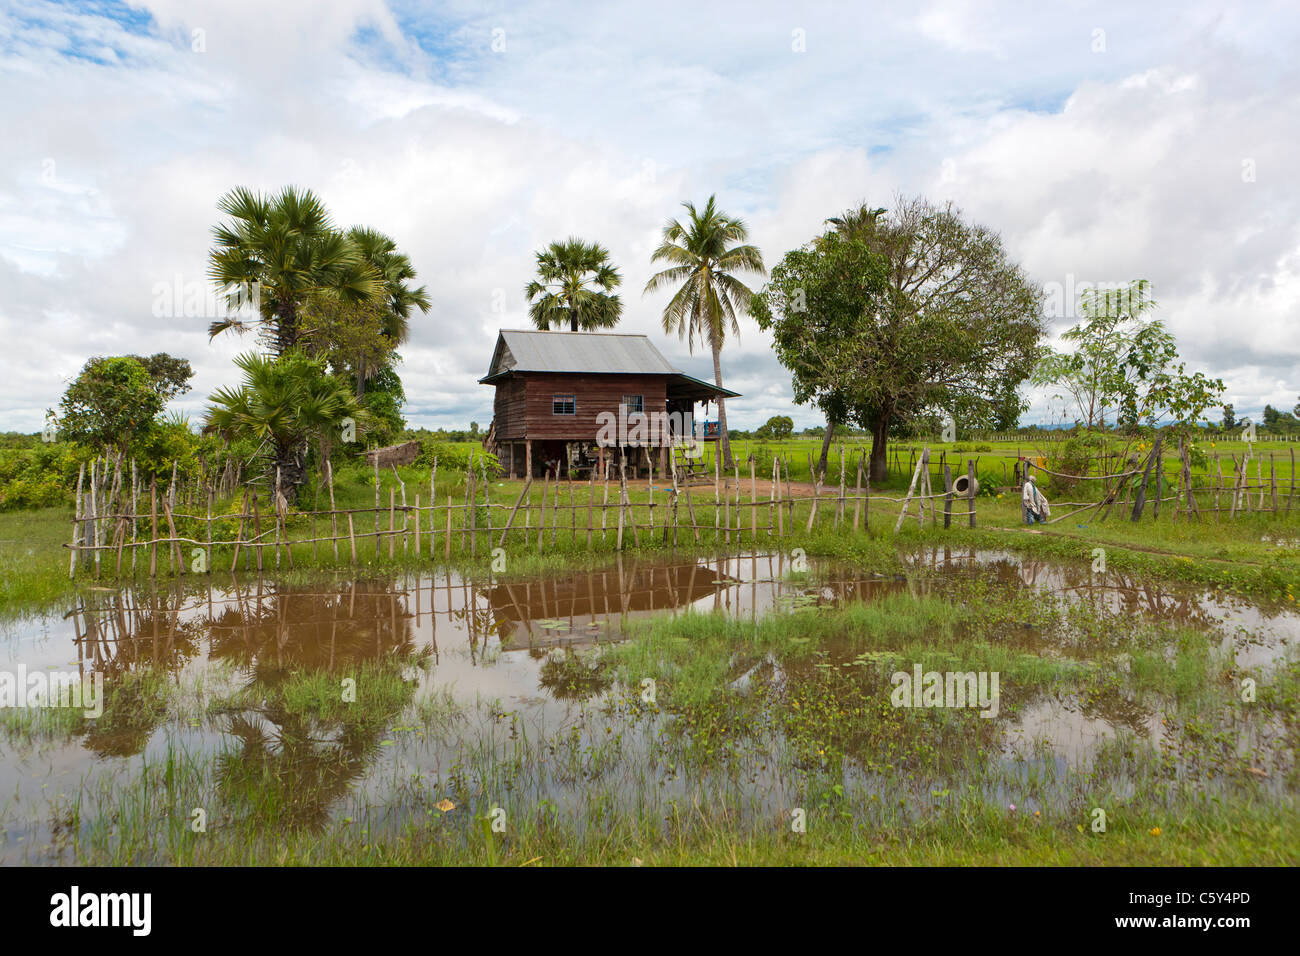 Wooden Hut in a Rice Field under palm trees, near Siem Reap, Cambodia, Asia Stock Photo